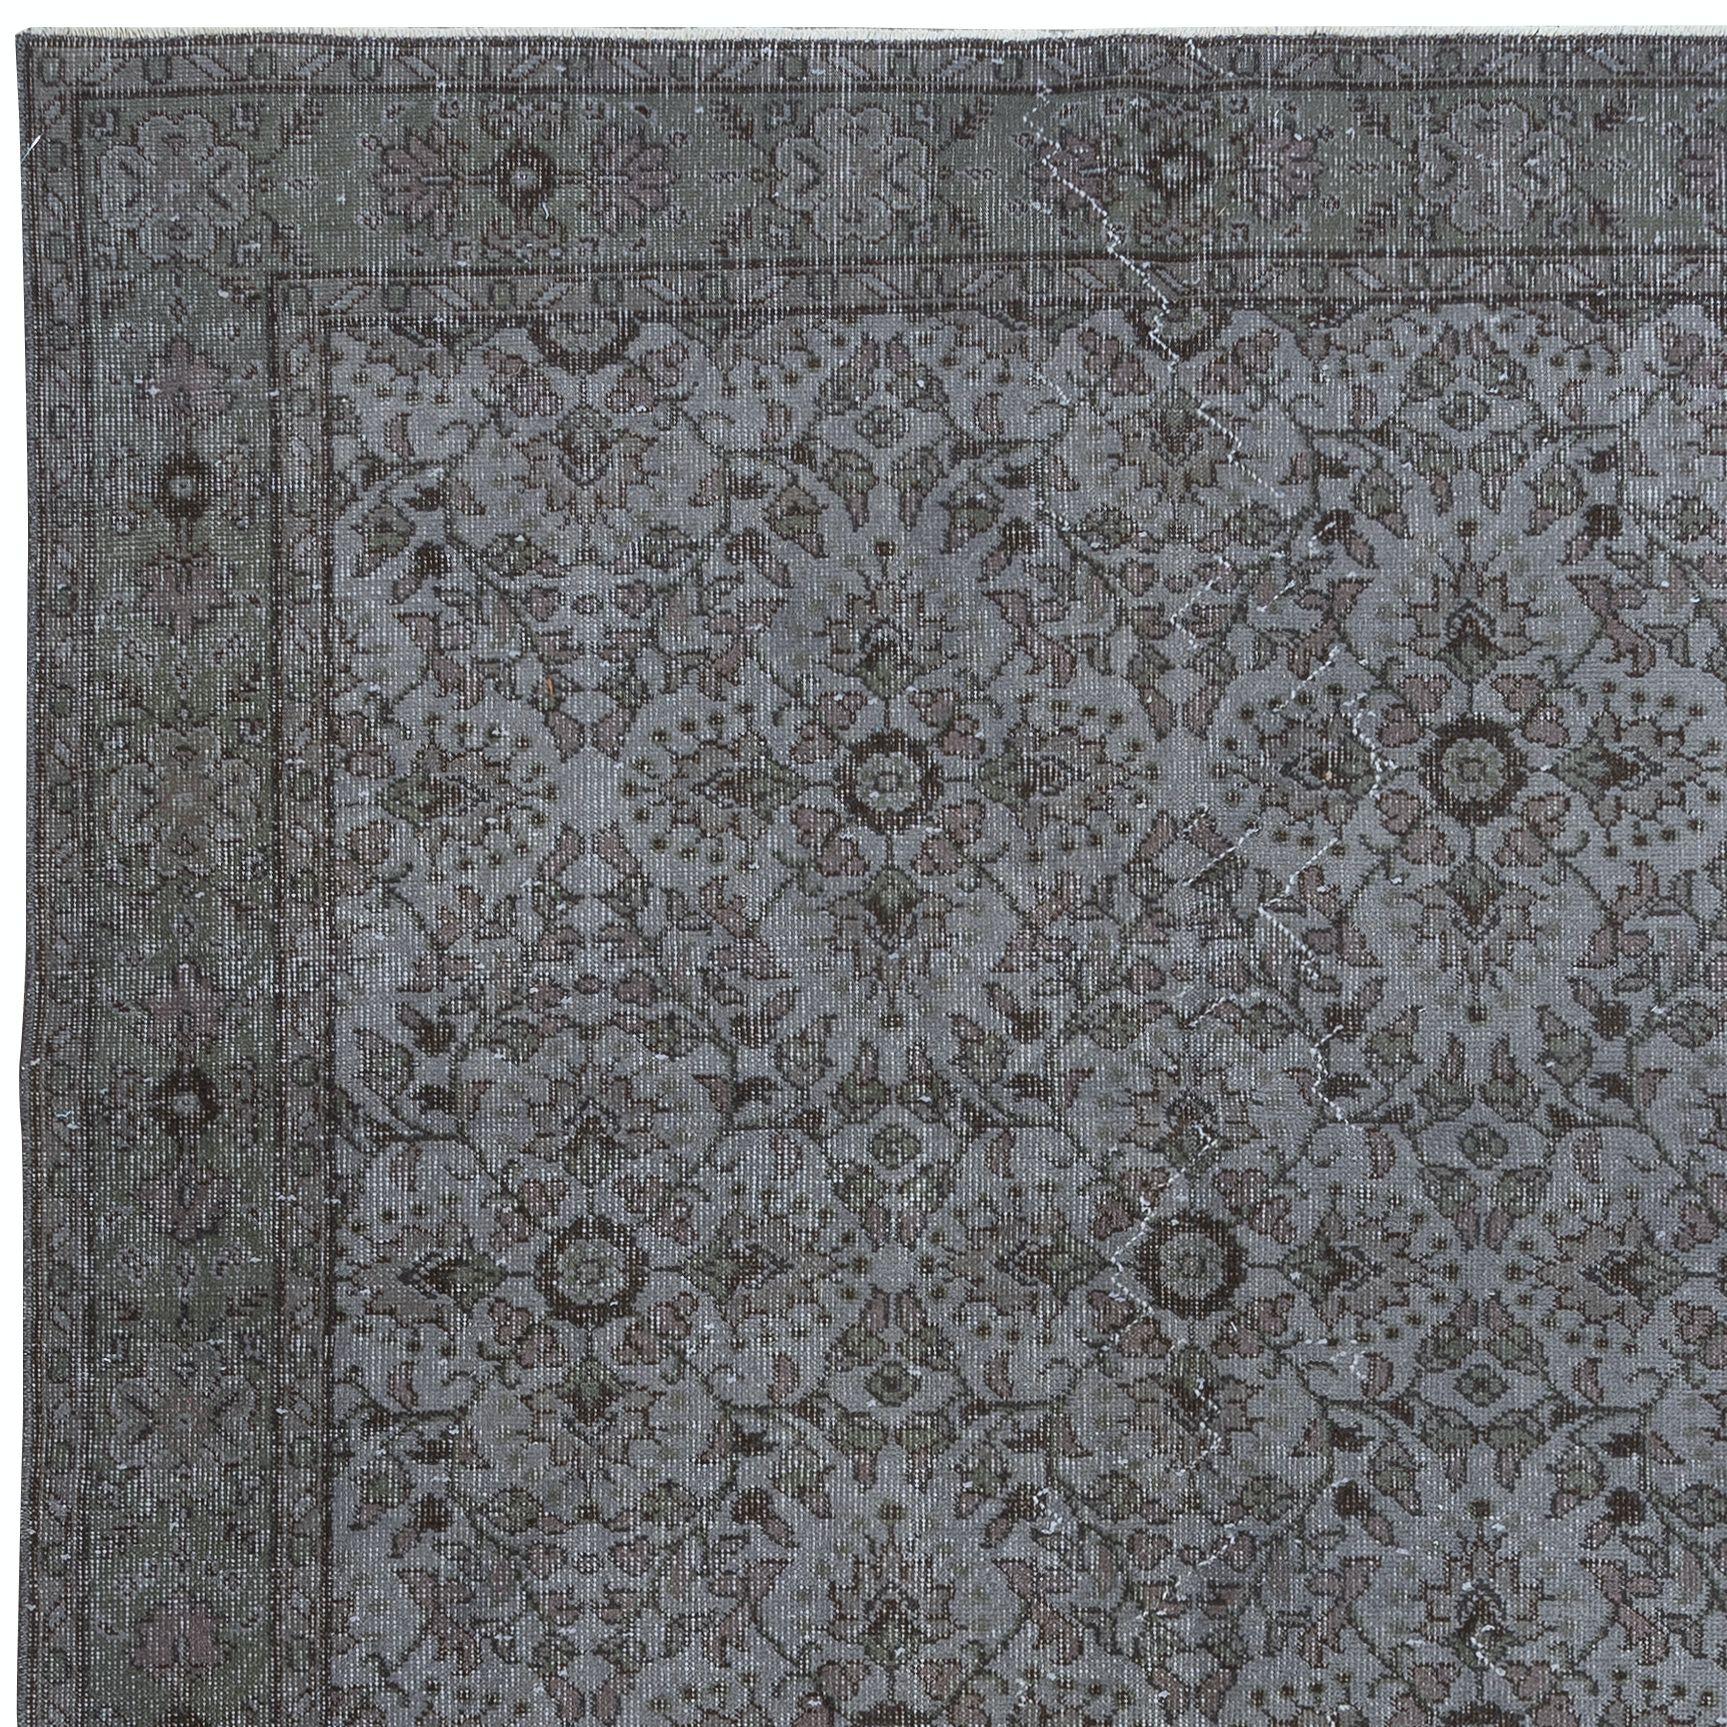 Hand-Woven 6x9.4 Ft Upcycled Handmade Area Rug in Gray, Contemporary Turkish Carpet For Sale